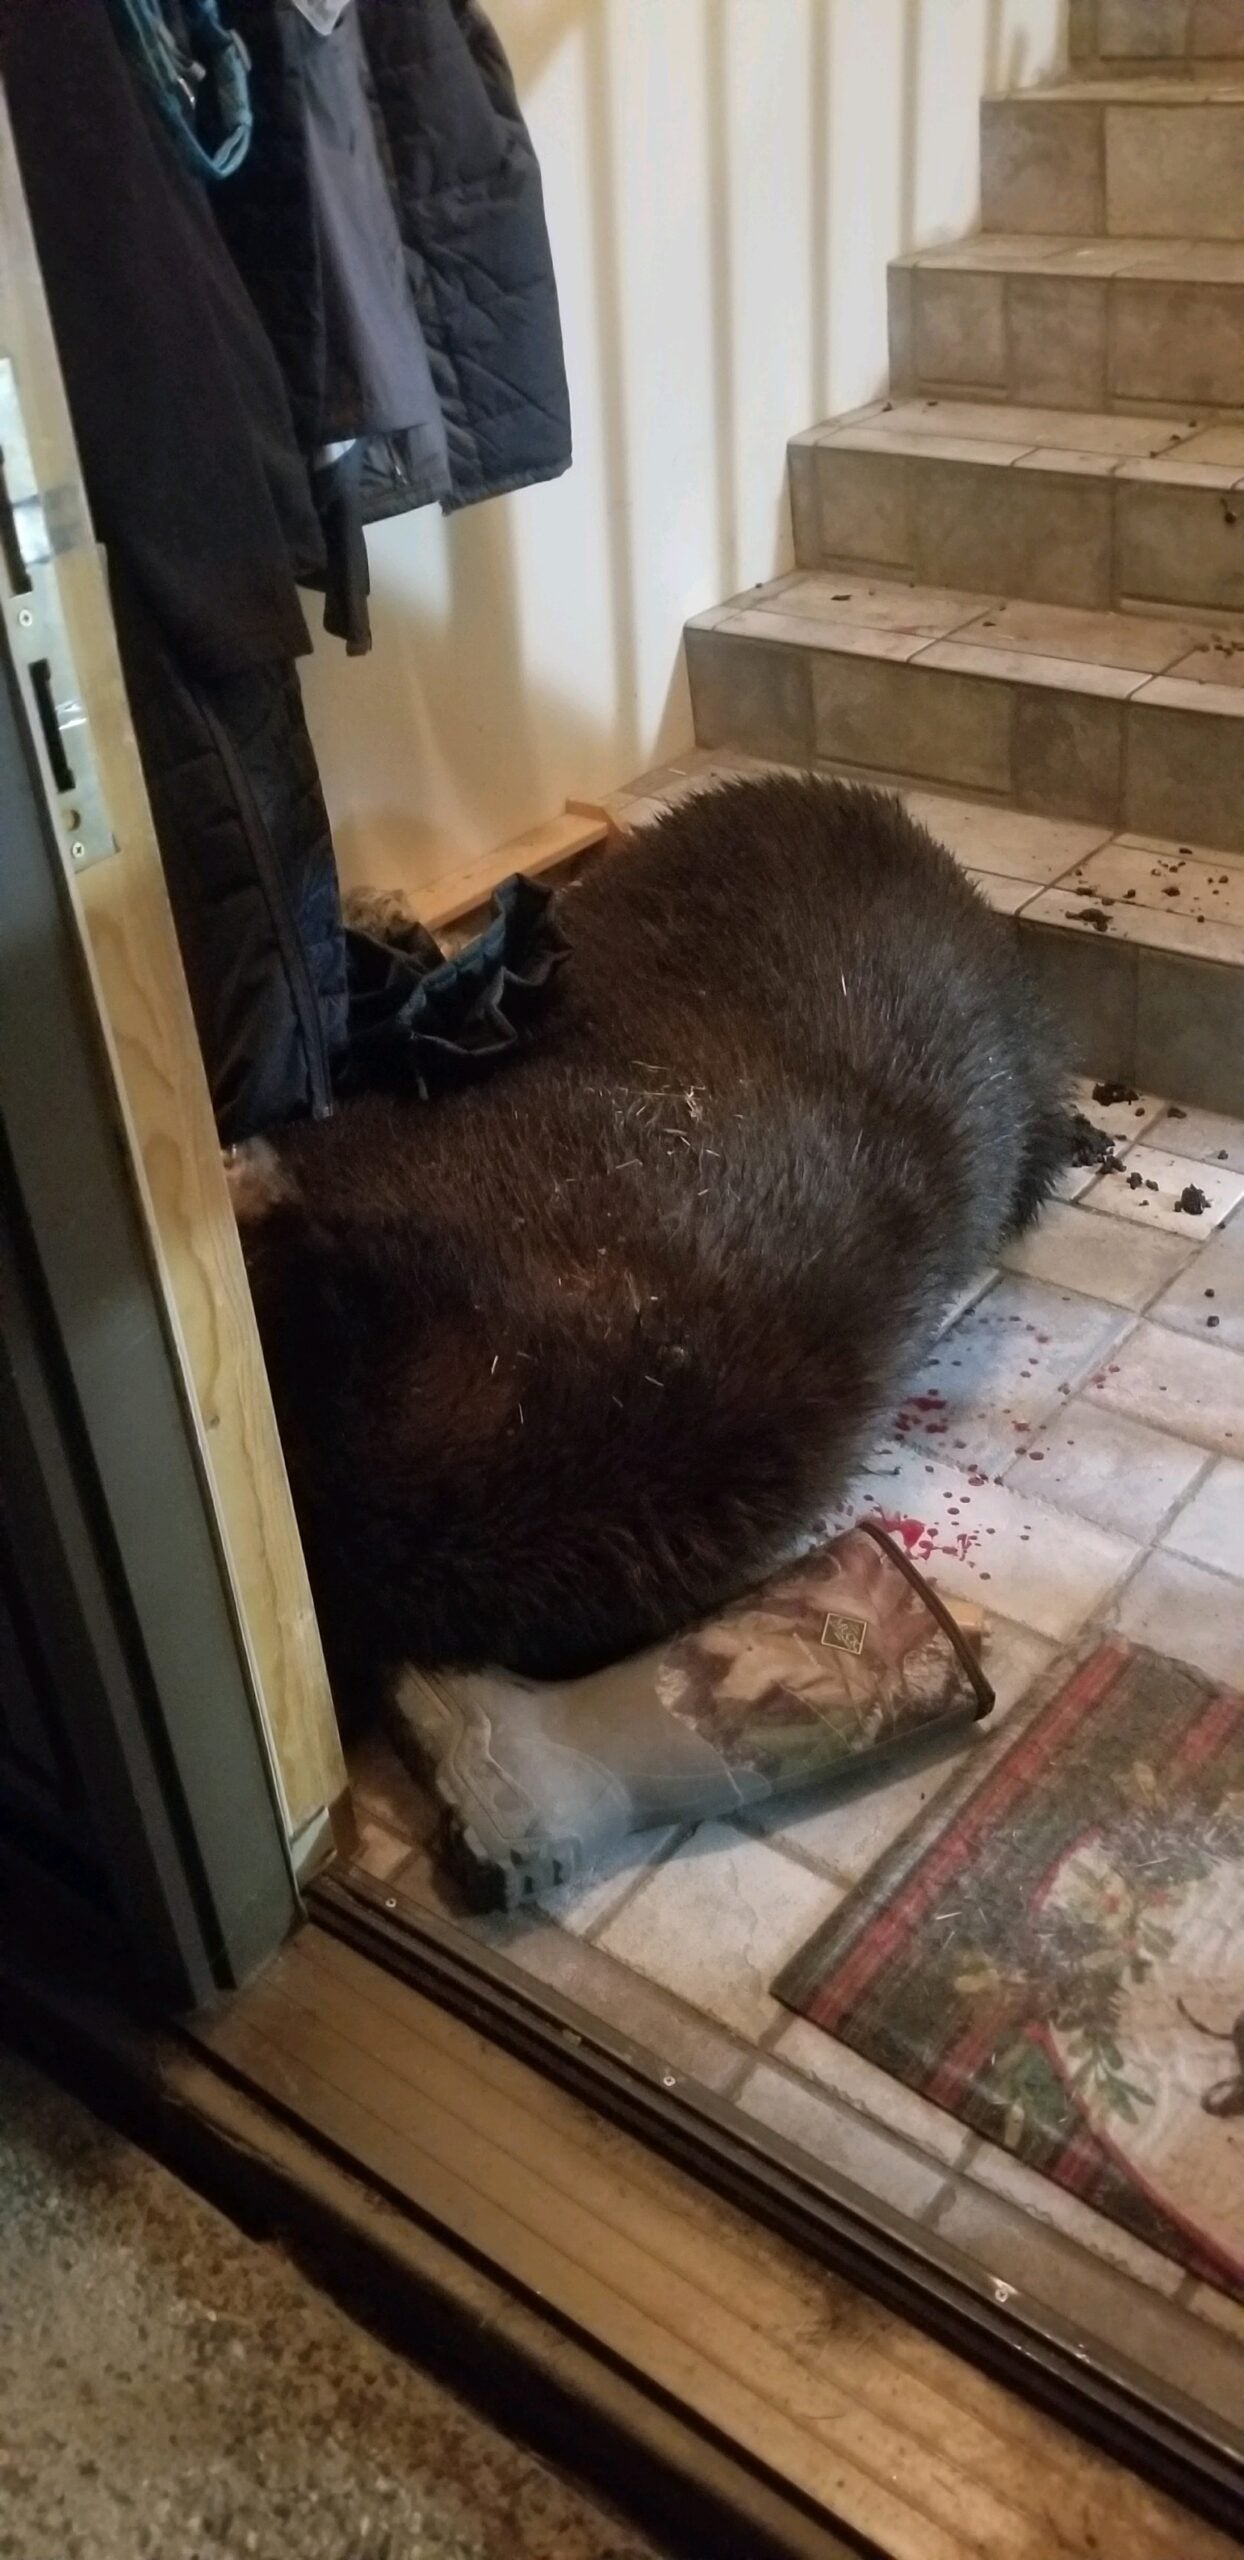 Colorado man fires .40 Cal Glock 9 times to kill black bear that entered his home at night